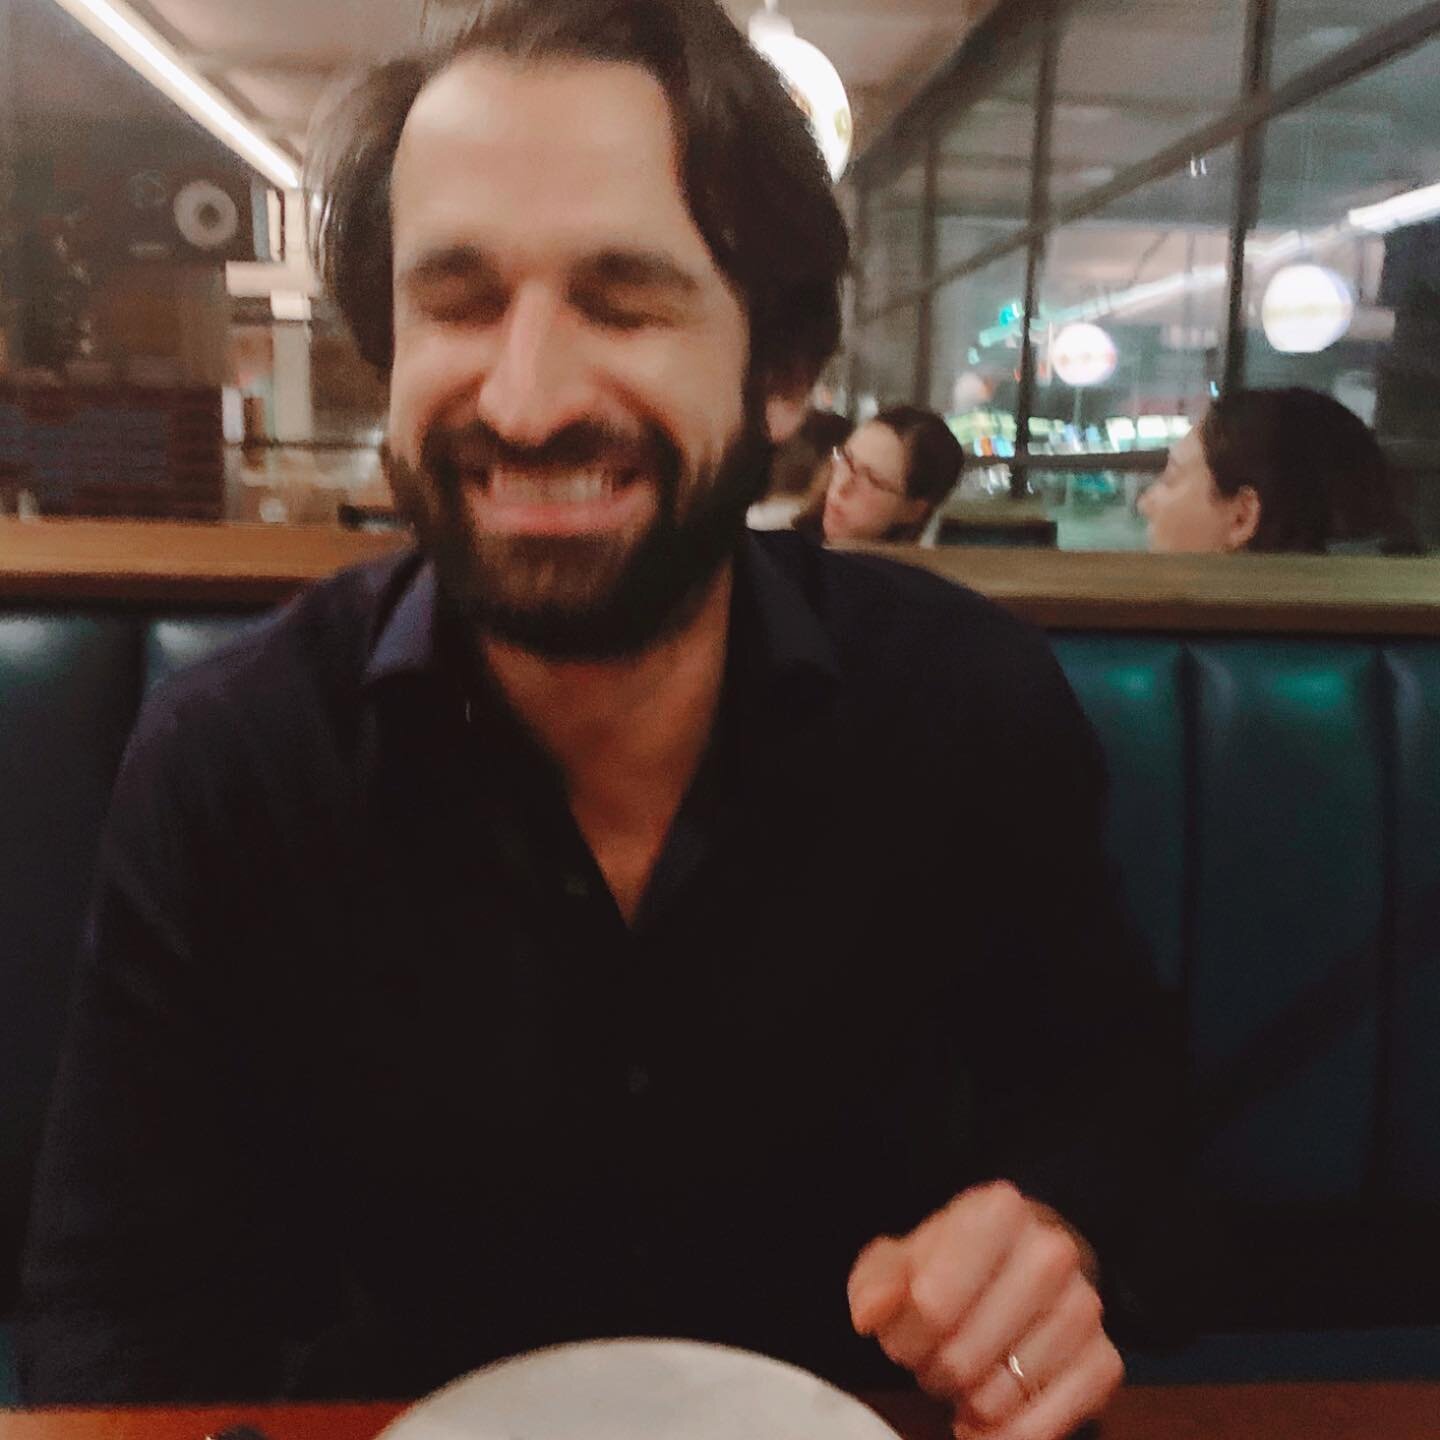 We&rsquo;re far from perfect, but I&rsquo;m glad I married someone I can laugh like this with after four kids, a lot of joy and hurt, challenges and wins, and the most stressful year of our lives. This is back from our first date night out post-pande